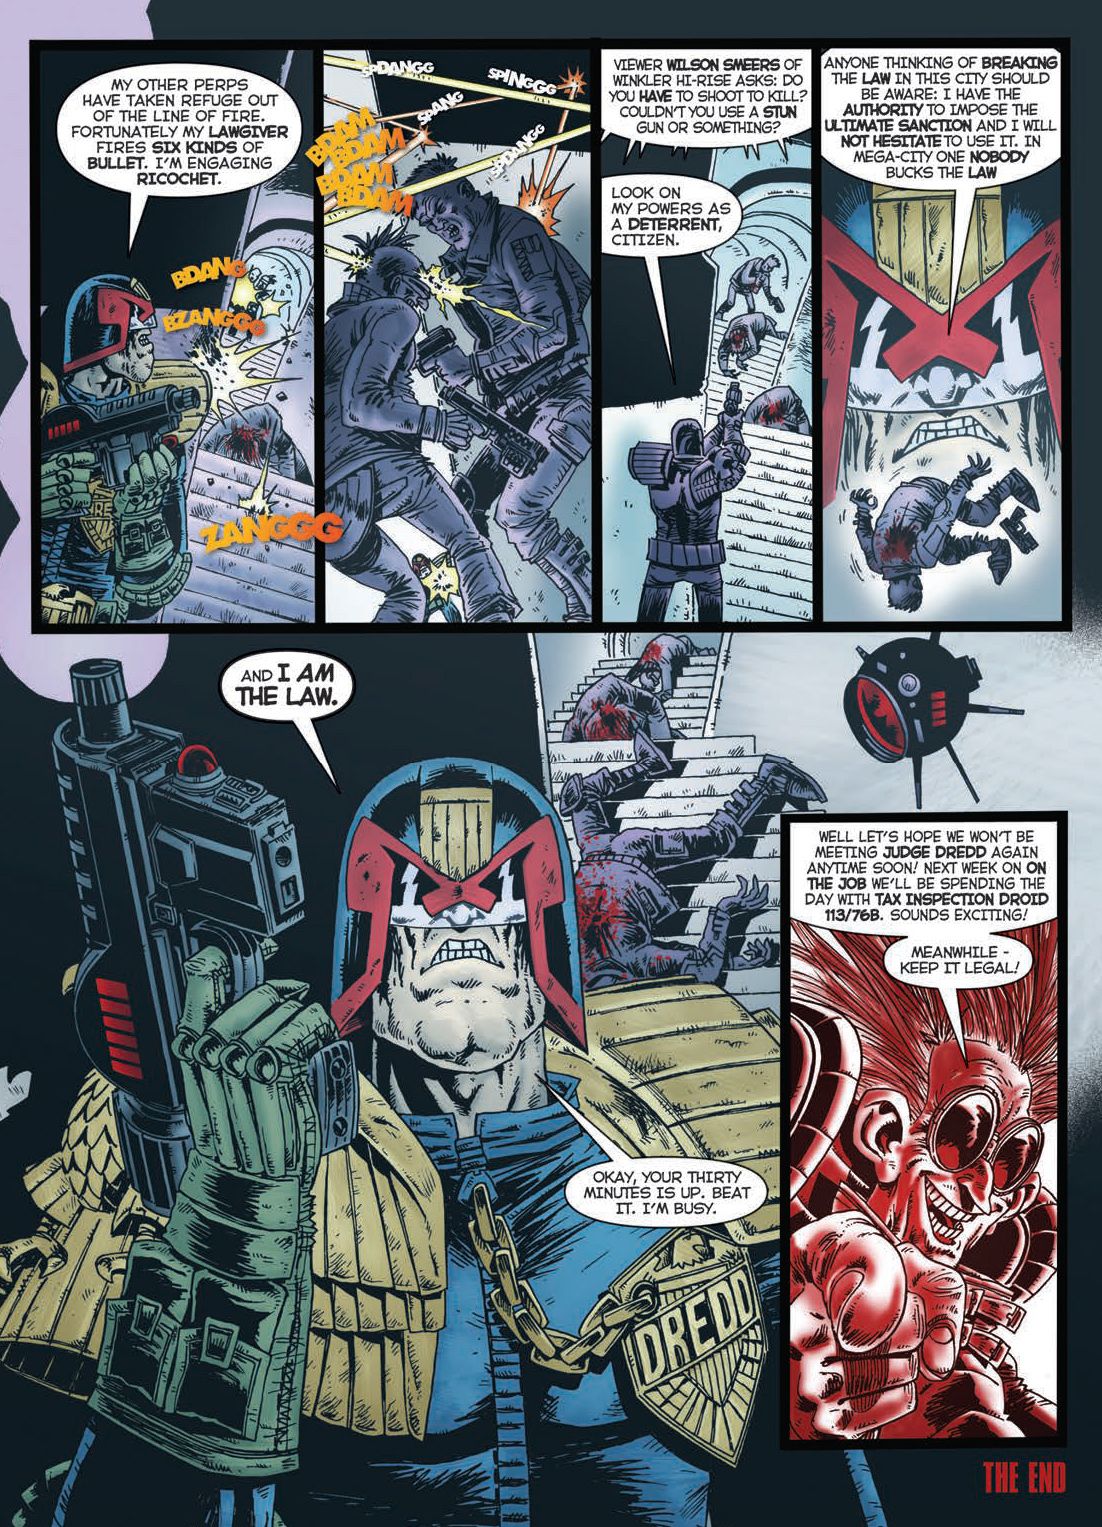 Read online Judge Dredd: The Restricted Files comic -  Issue # TPB 4 - 217